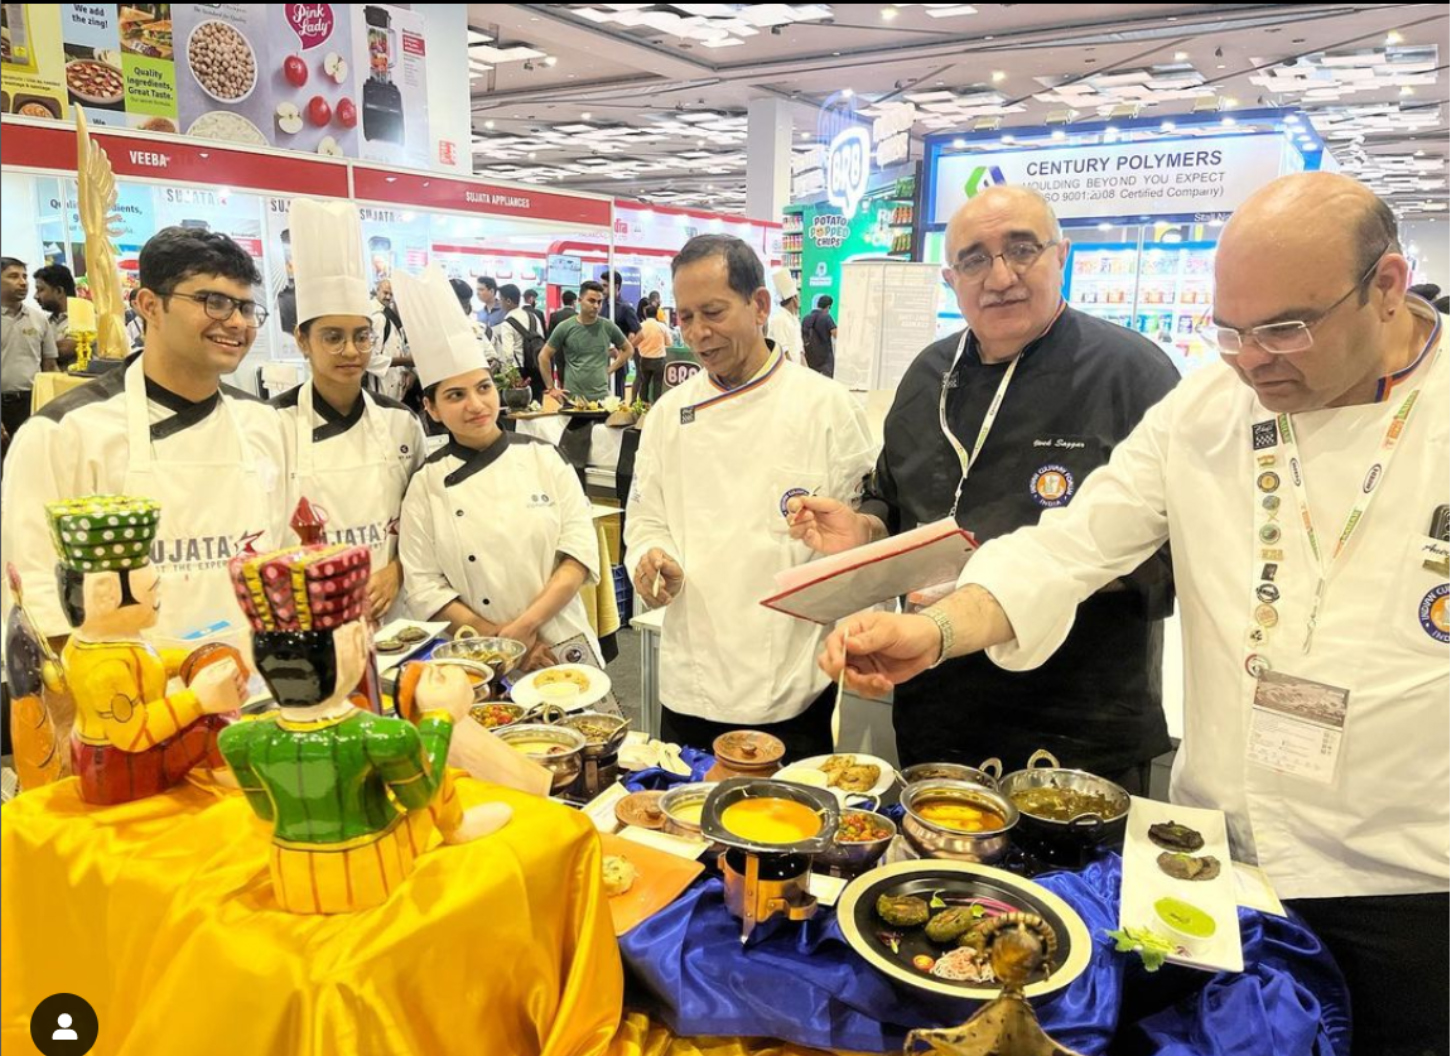 Culinary Art India 2023 event saw participation of over 500 chefs